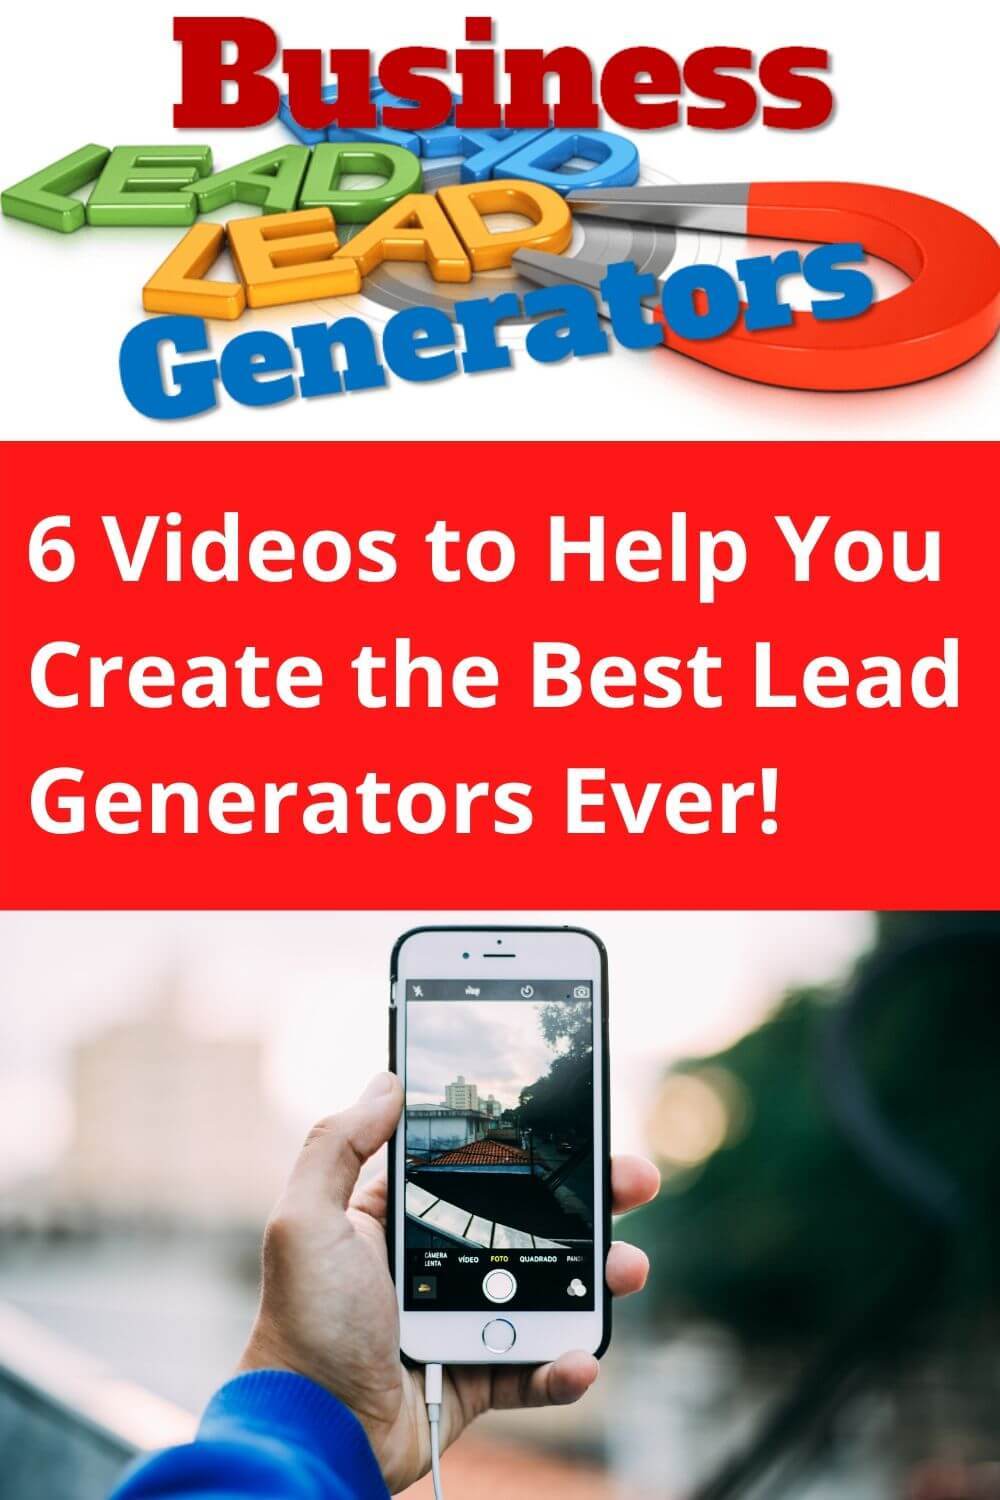 6 videos to help you create the best lead generators ever!